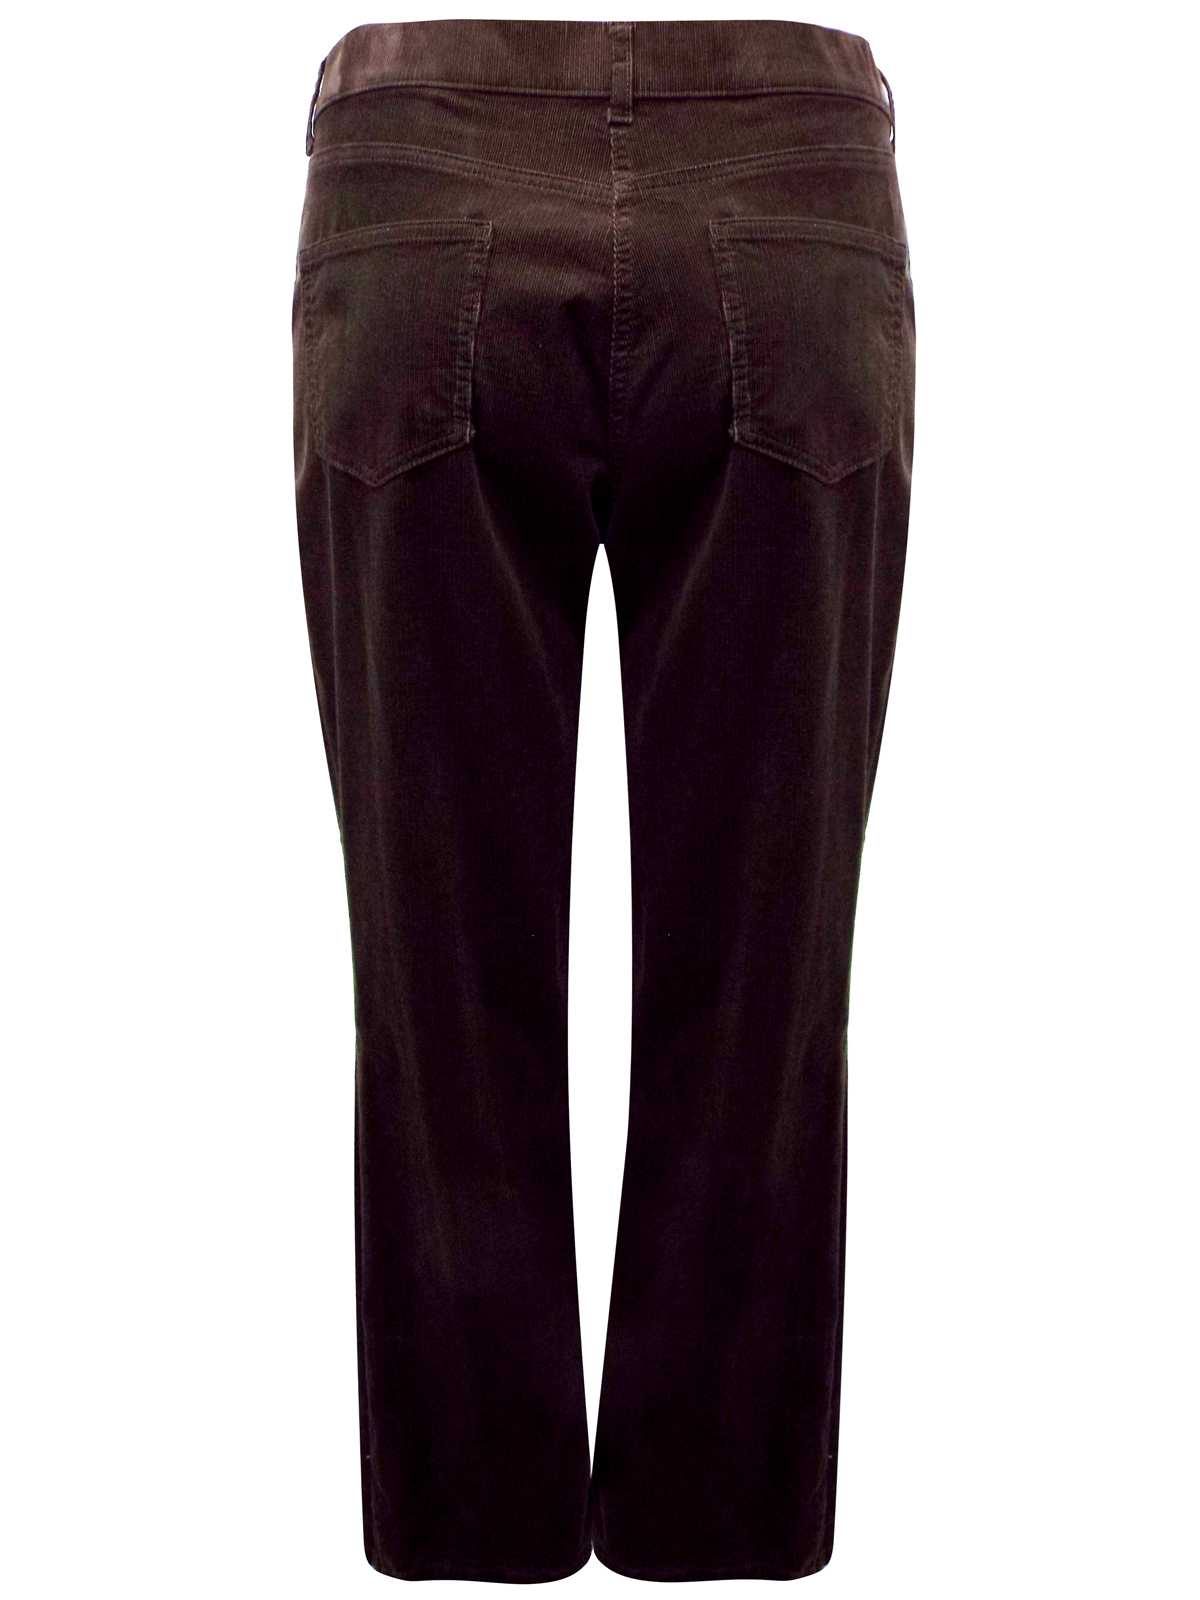 Marks and Spencer - - M&5 BROWN Cotton Rich Cord Straight Leg Trousers ...